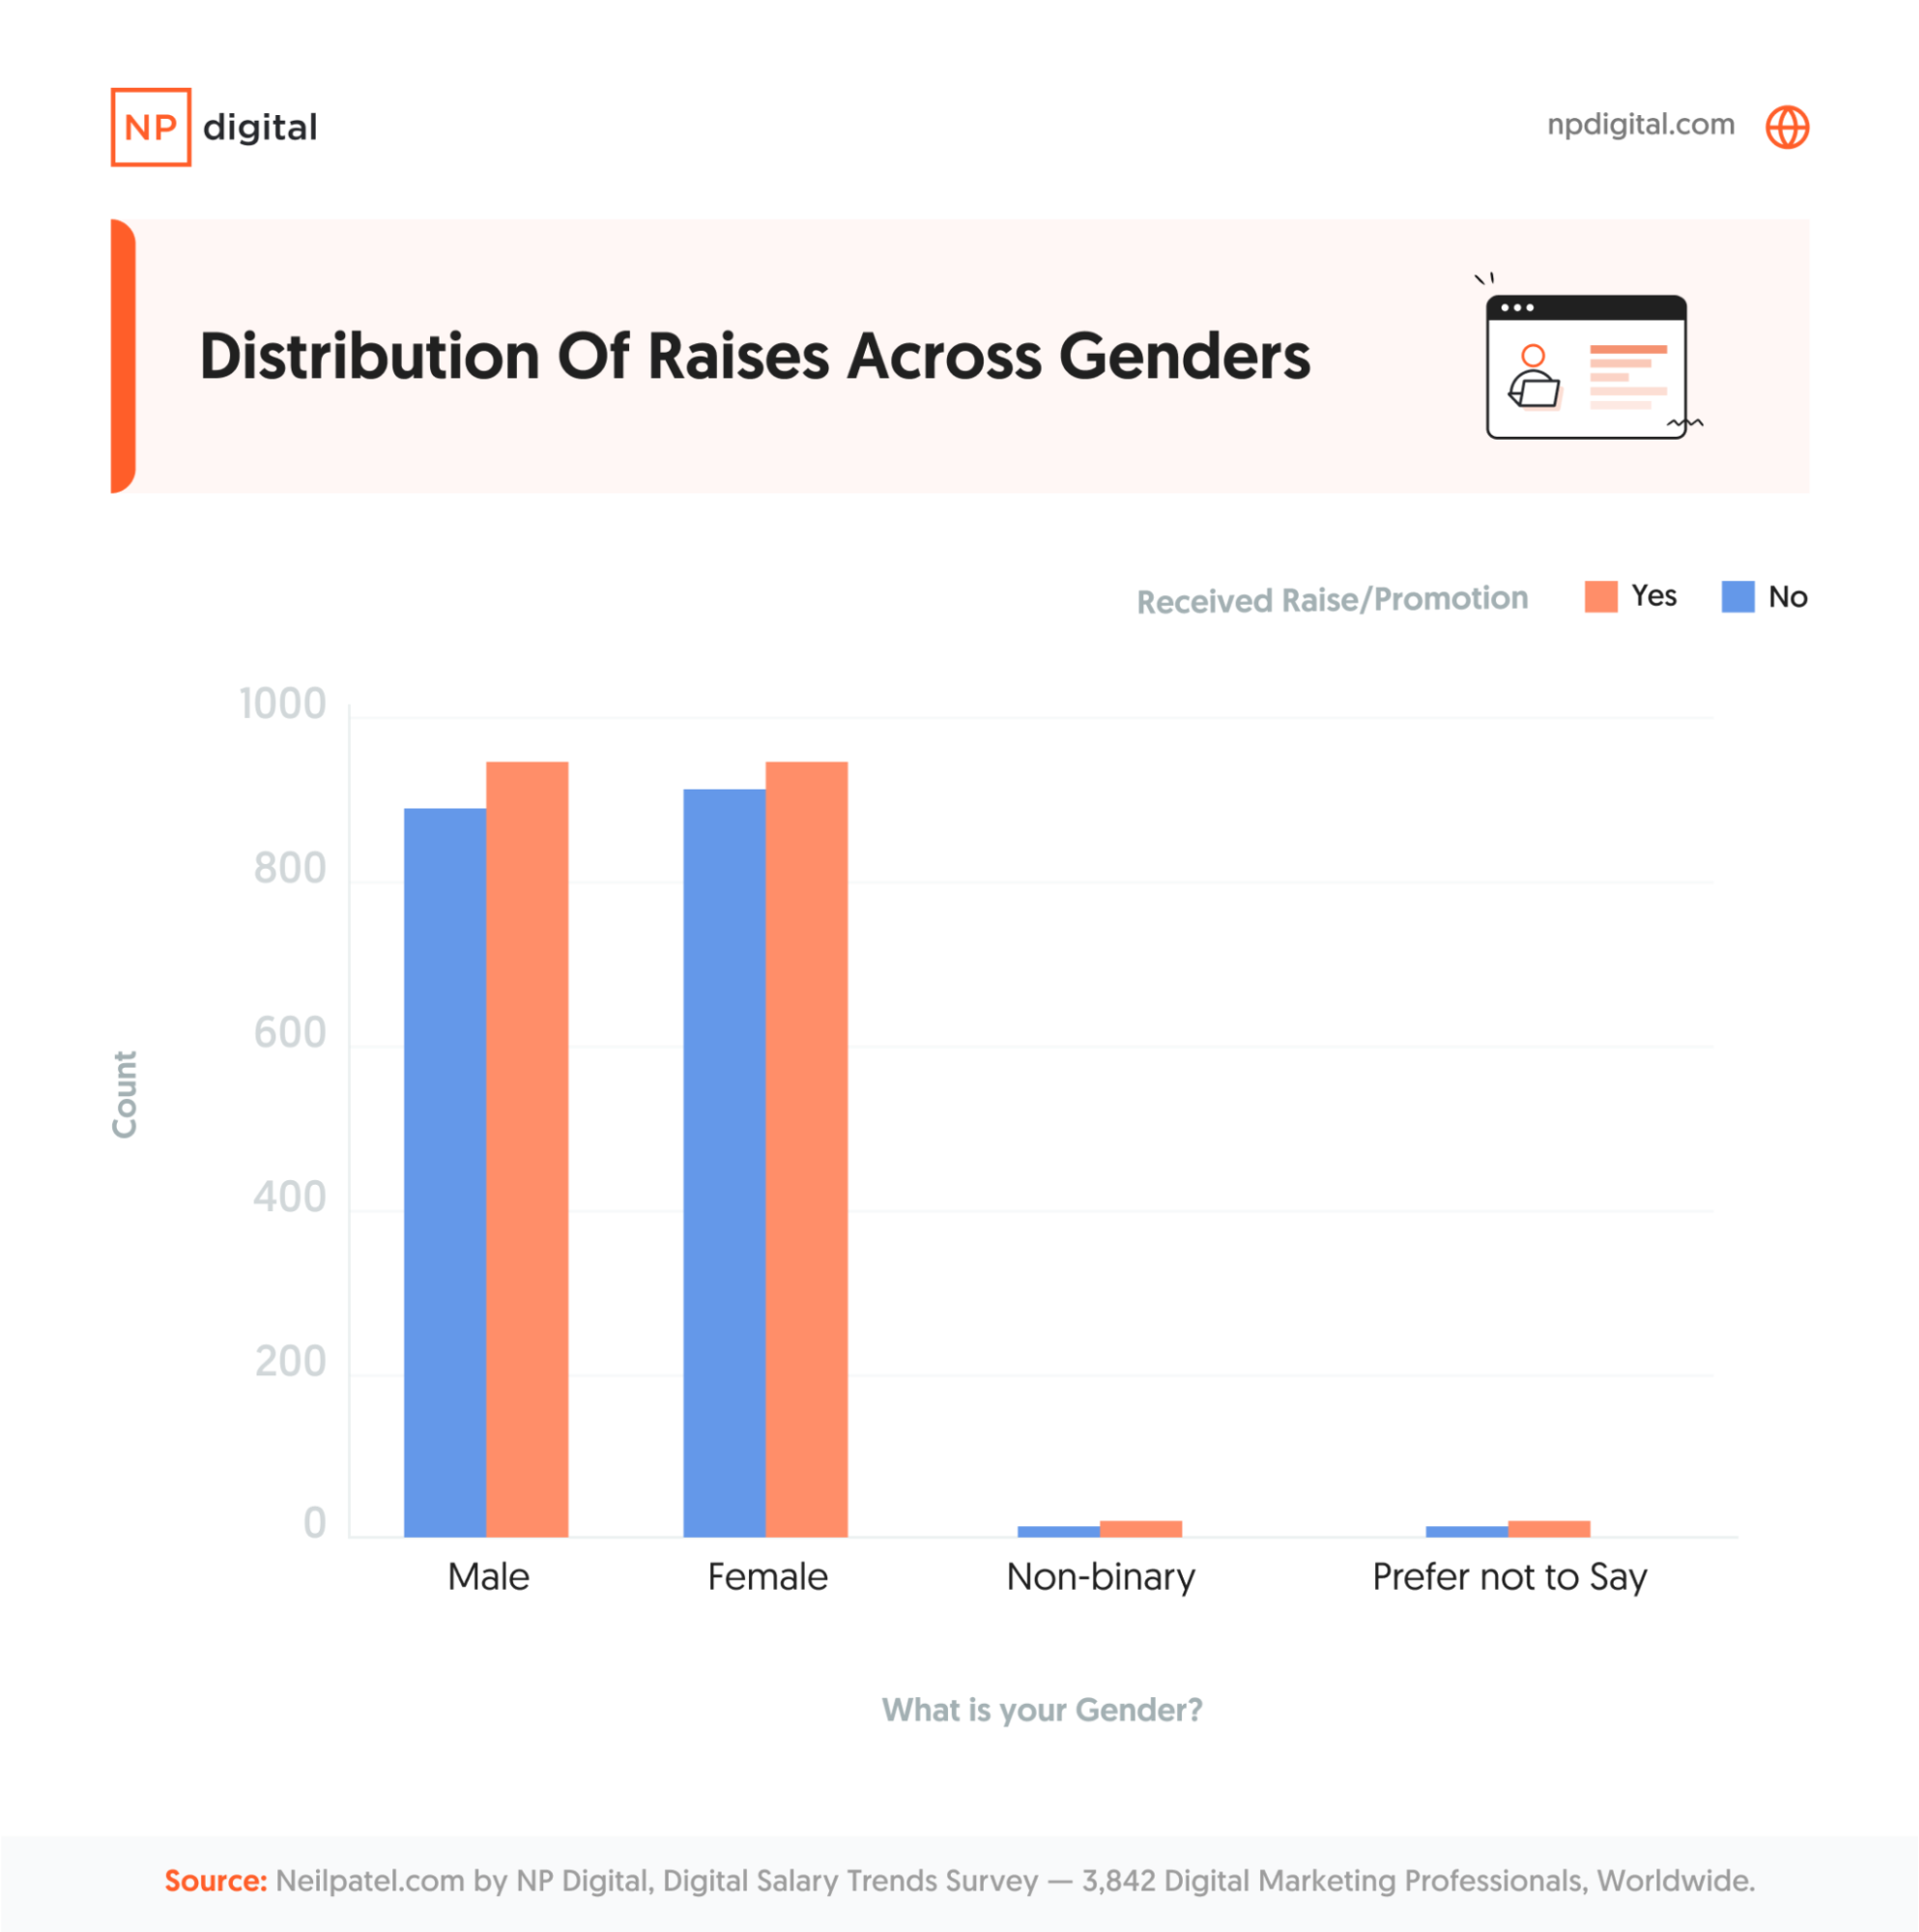 A bar chart showing the distribution of raises across genders